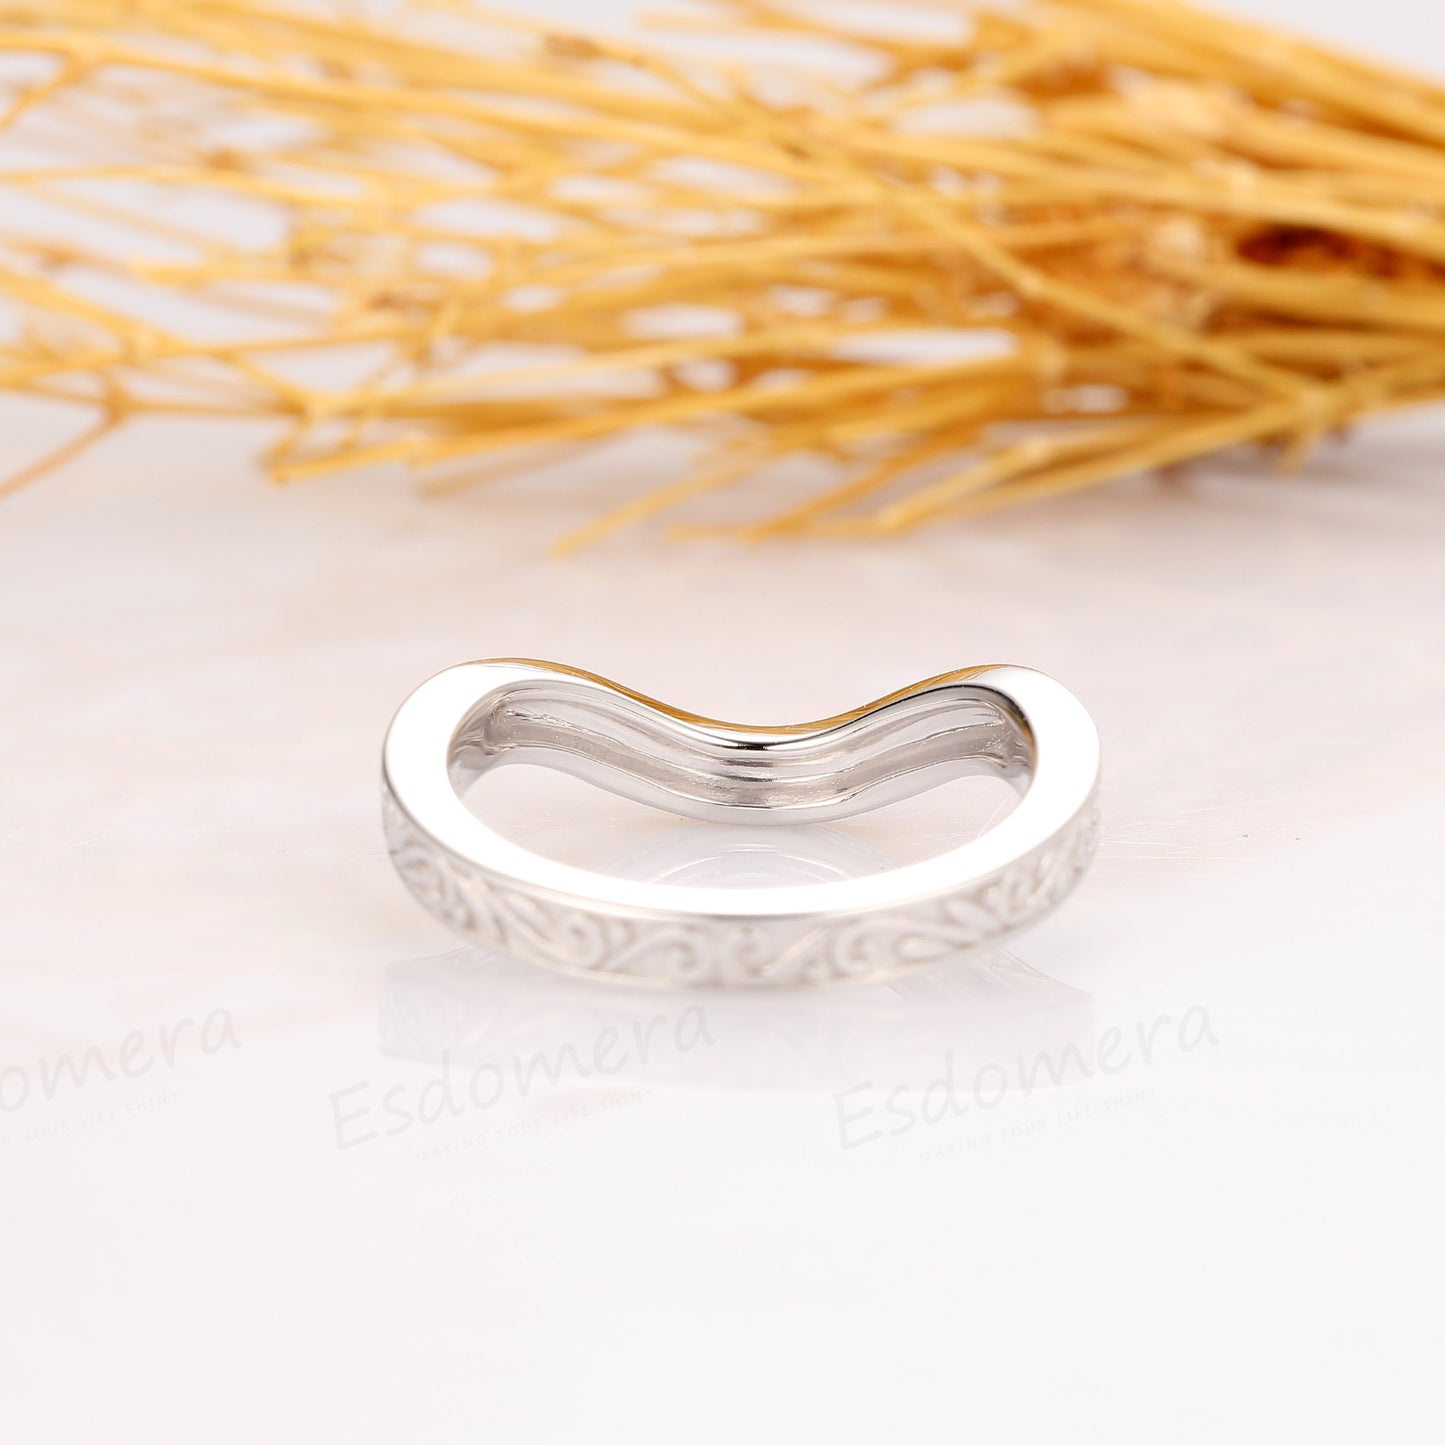 Solid 14k White Gold Wedding Band, Curved Design Matching Ring